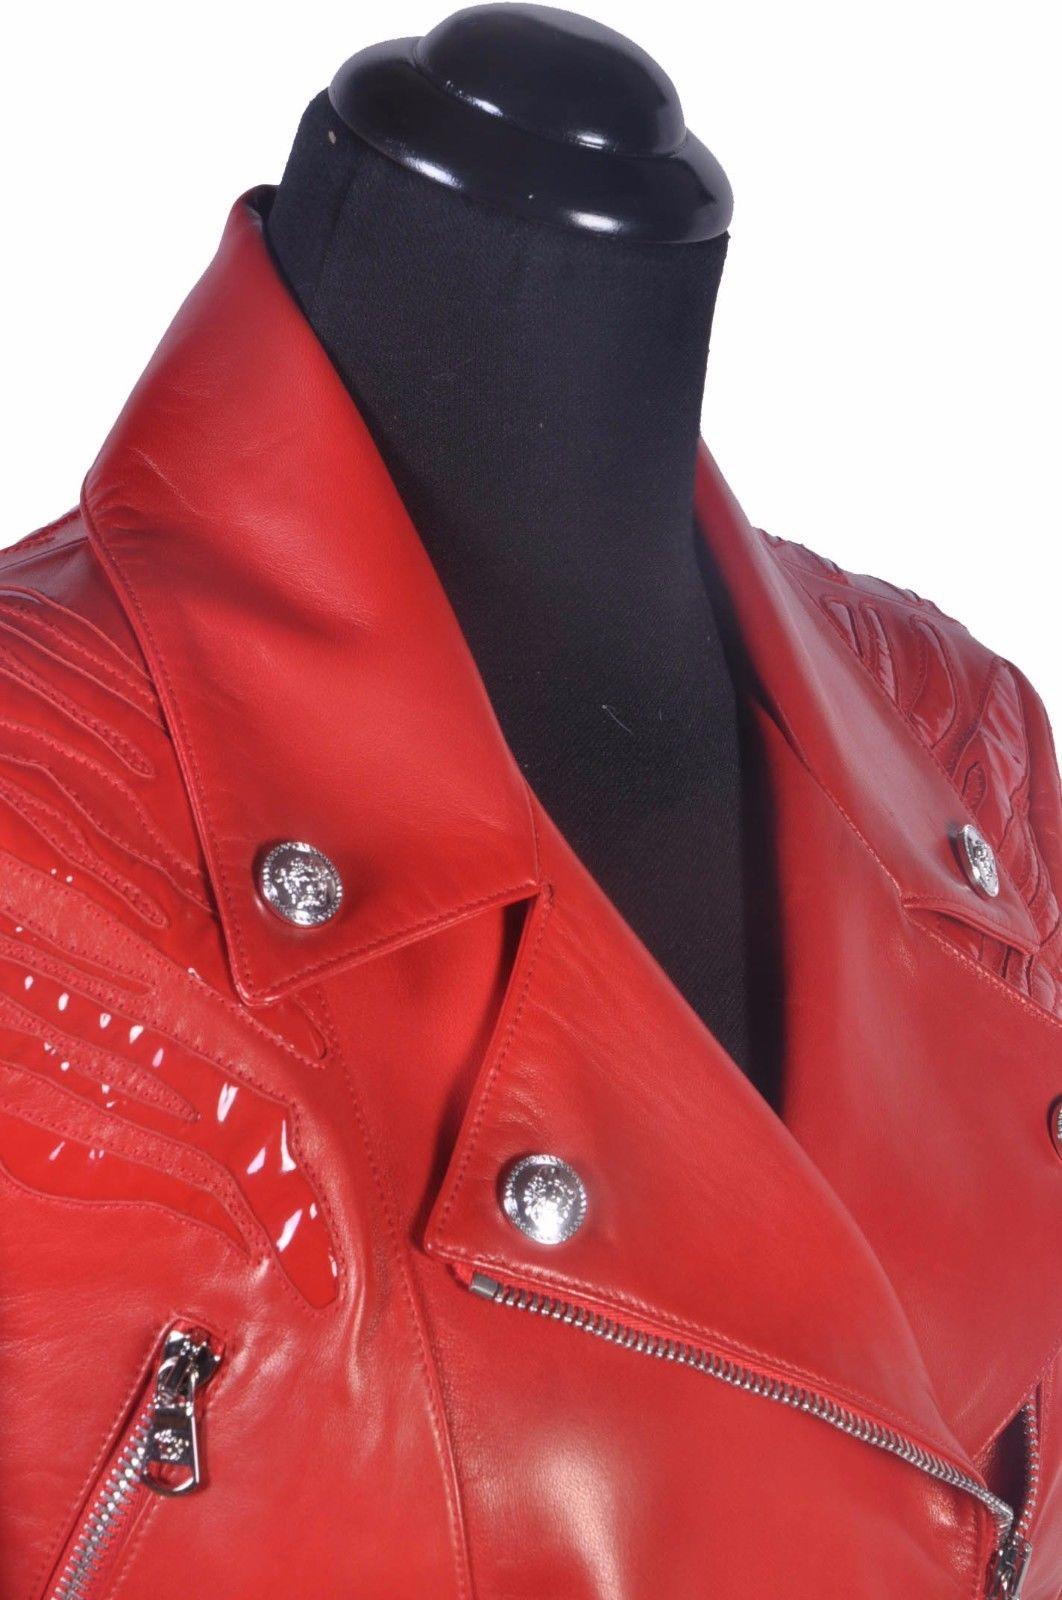 New VERSACE Red Leather Moto Jacket With Vinyl Animal Stripes In New Condition For Sale In Montgomery, TX